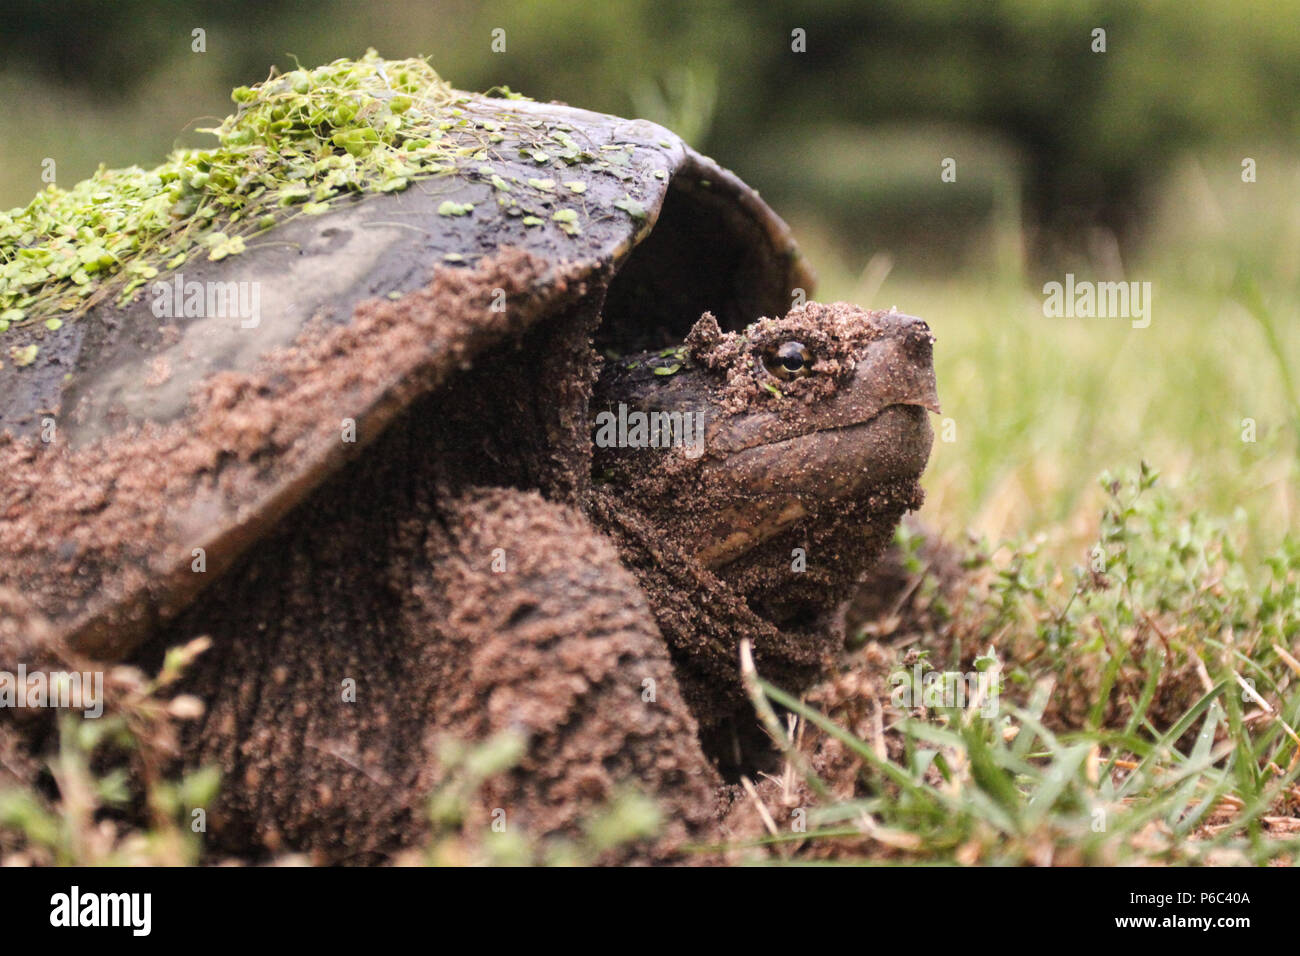 Female Snapping Turtle Laying Eggs Stock Photo